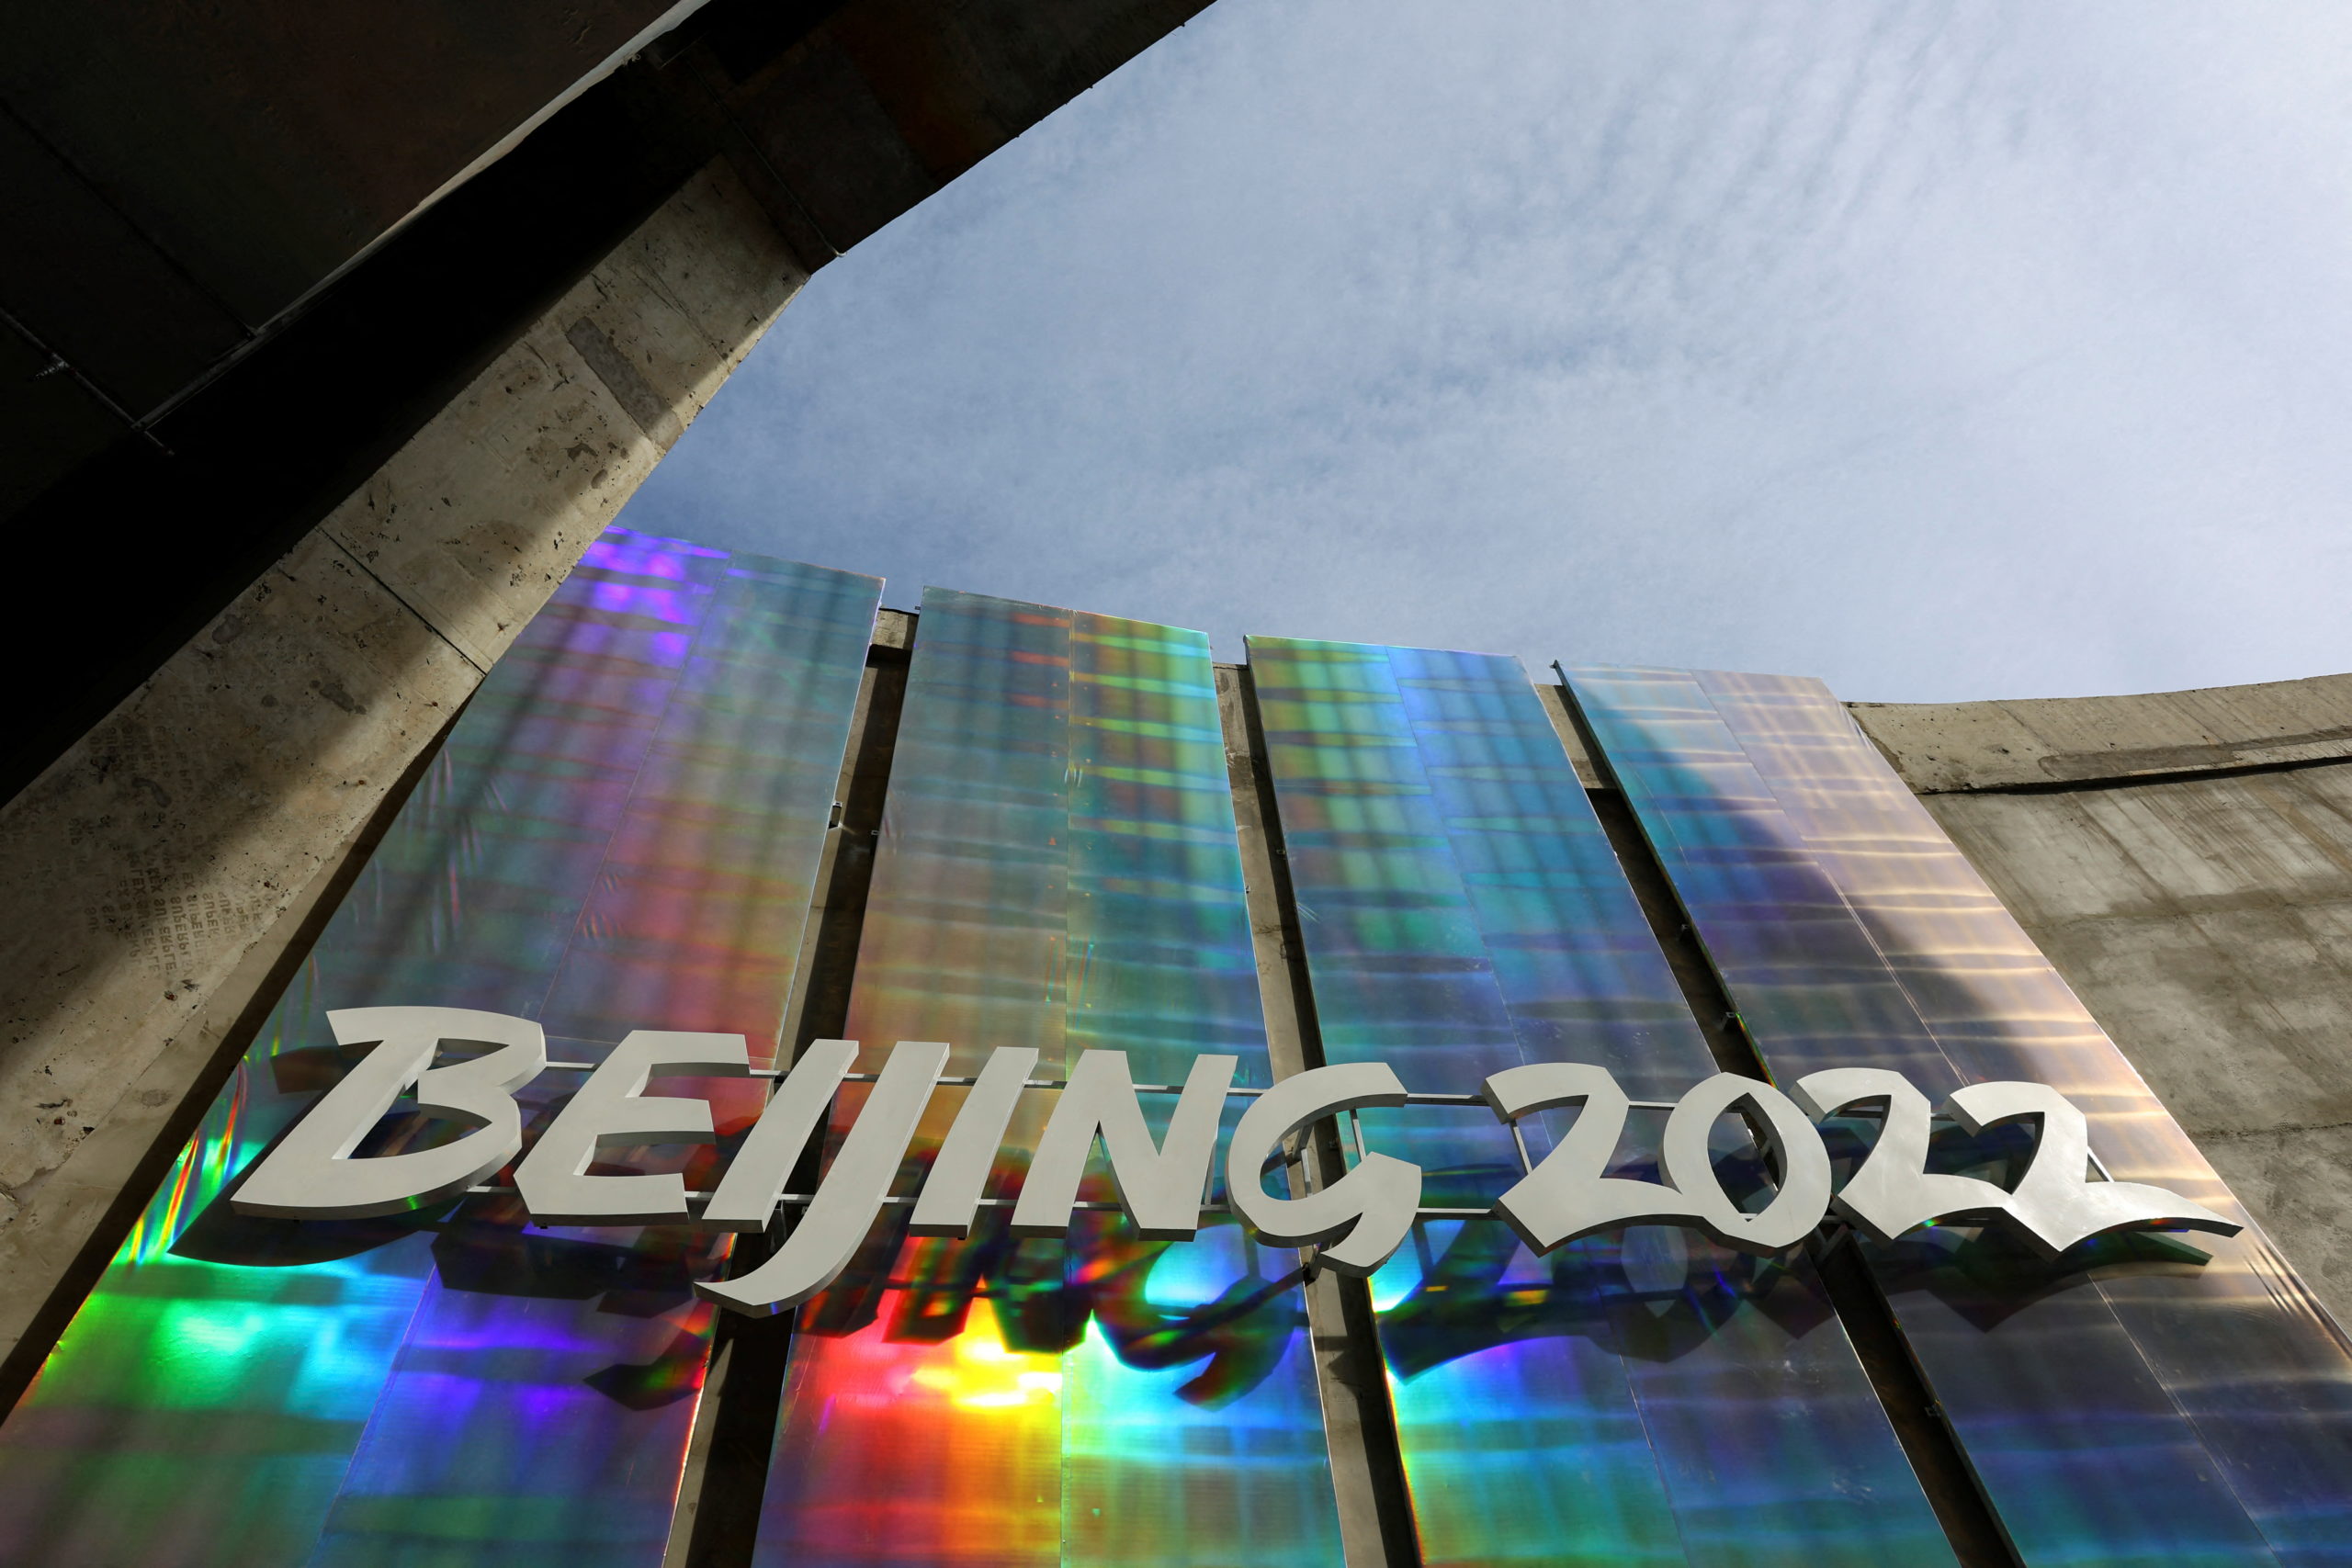 FILE PHOTO: A logo is pictured ahead of the Beijing 2022 Winter Olympics at the Main Press Centre in Beijing, China January 8, 2022.